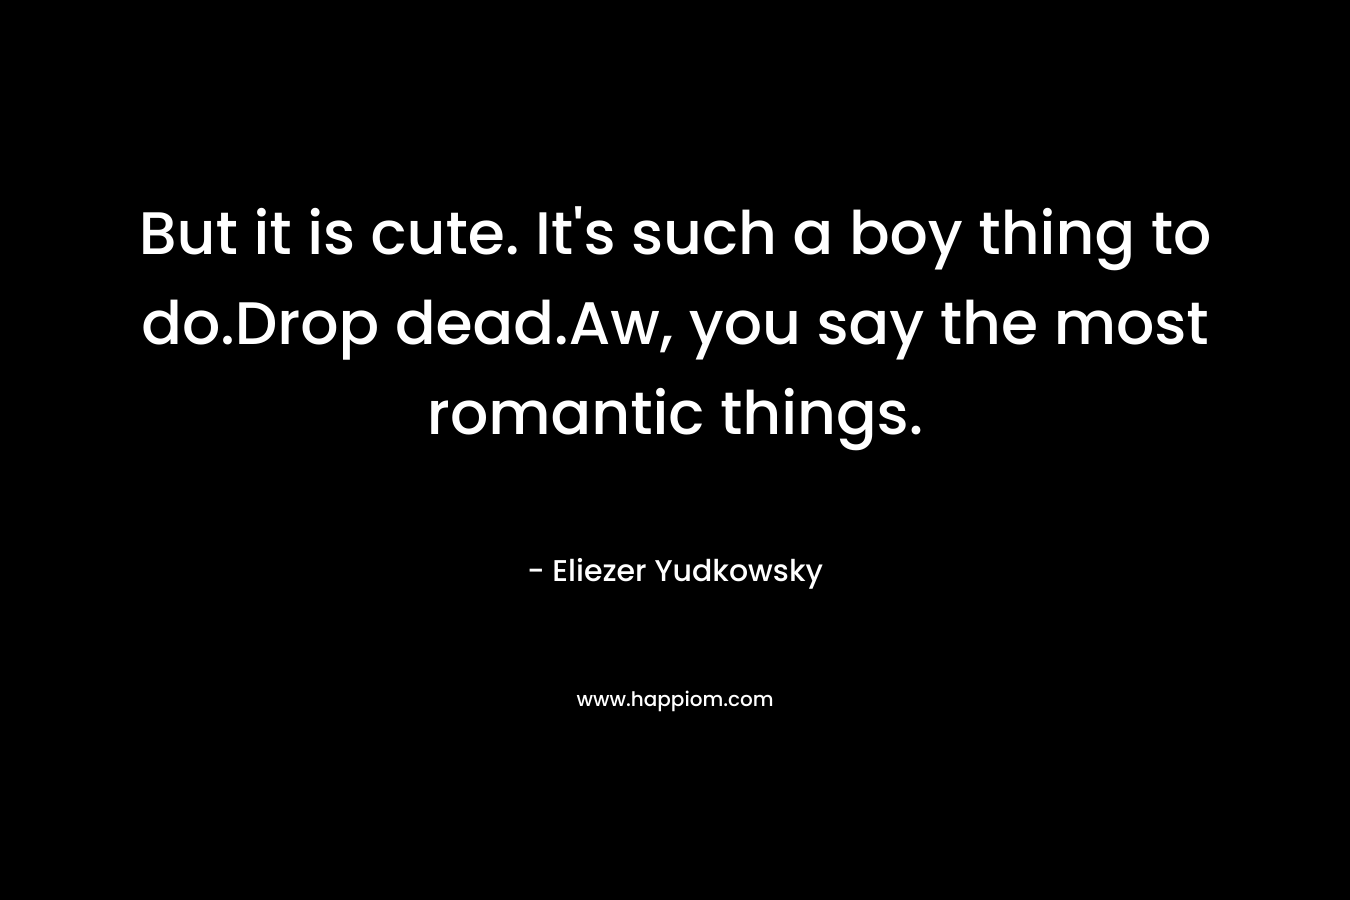 But it is cute. It’s such a boy thing to do.Drop dead.Aw, you say the most romantic things. – Eliezer Yudkowsky